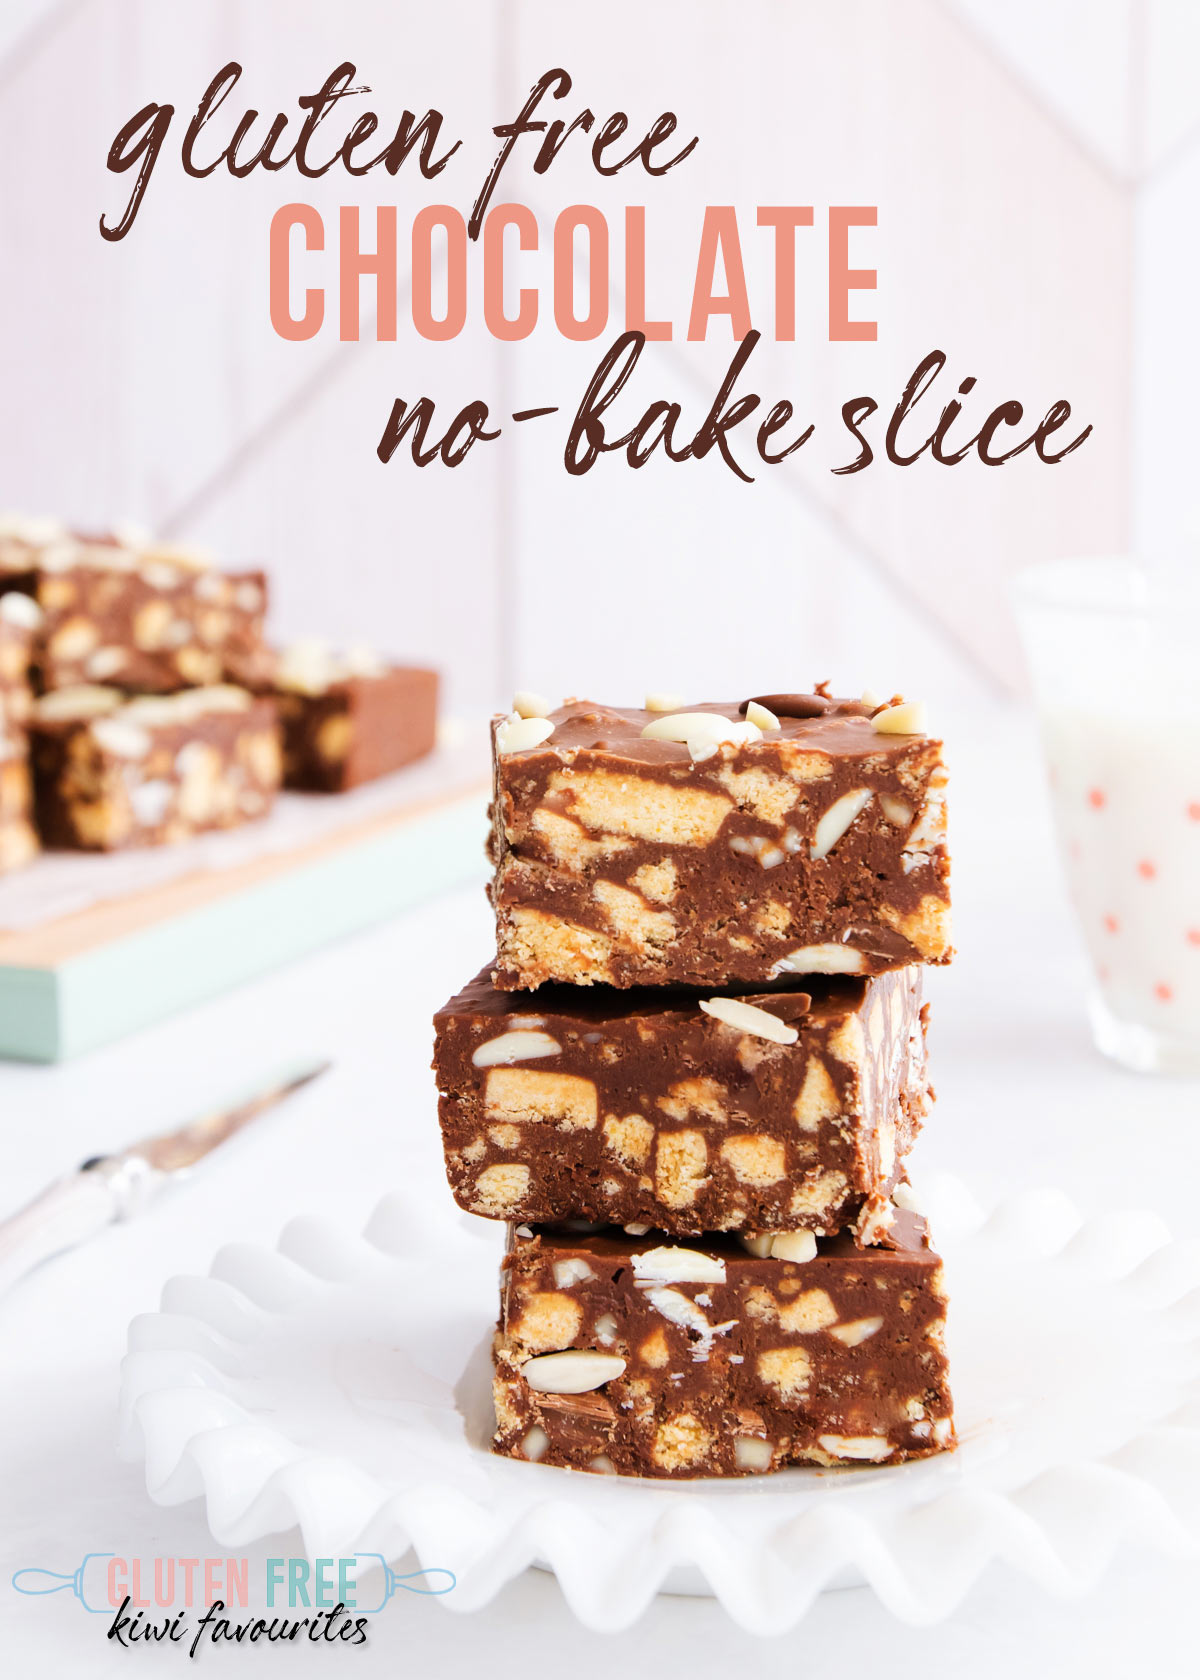 Three stacked pieces of slice on a white plate- text overlay reads "gluten free chocolate no-bake-slice".